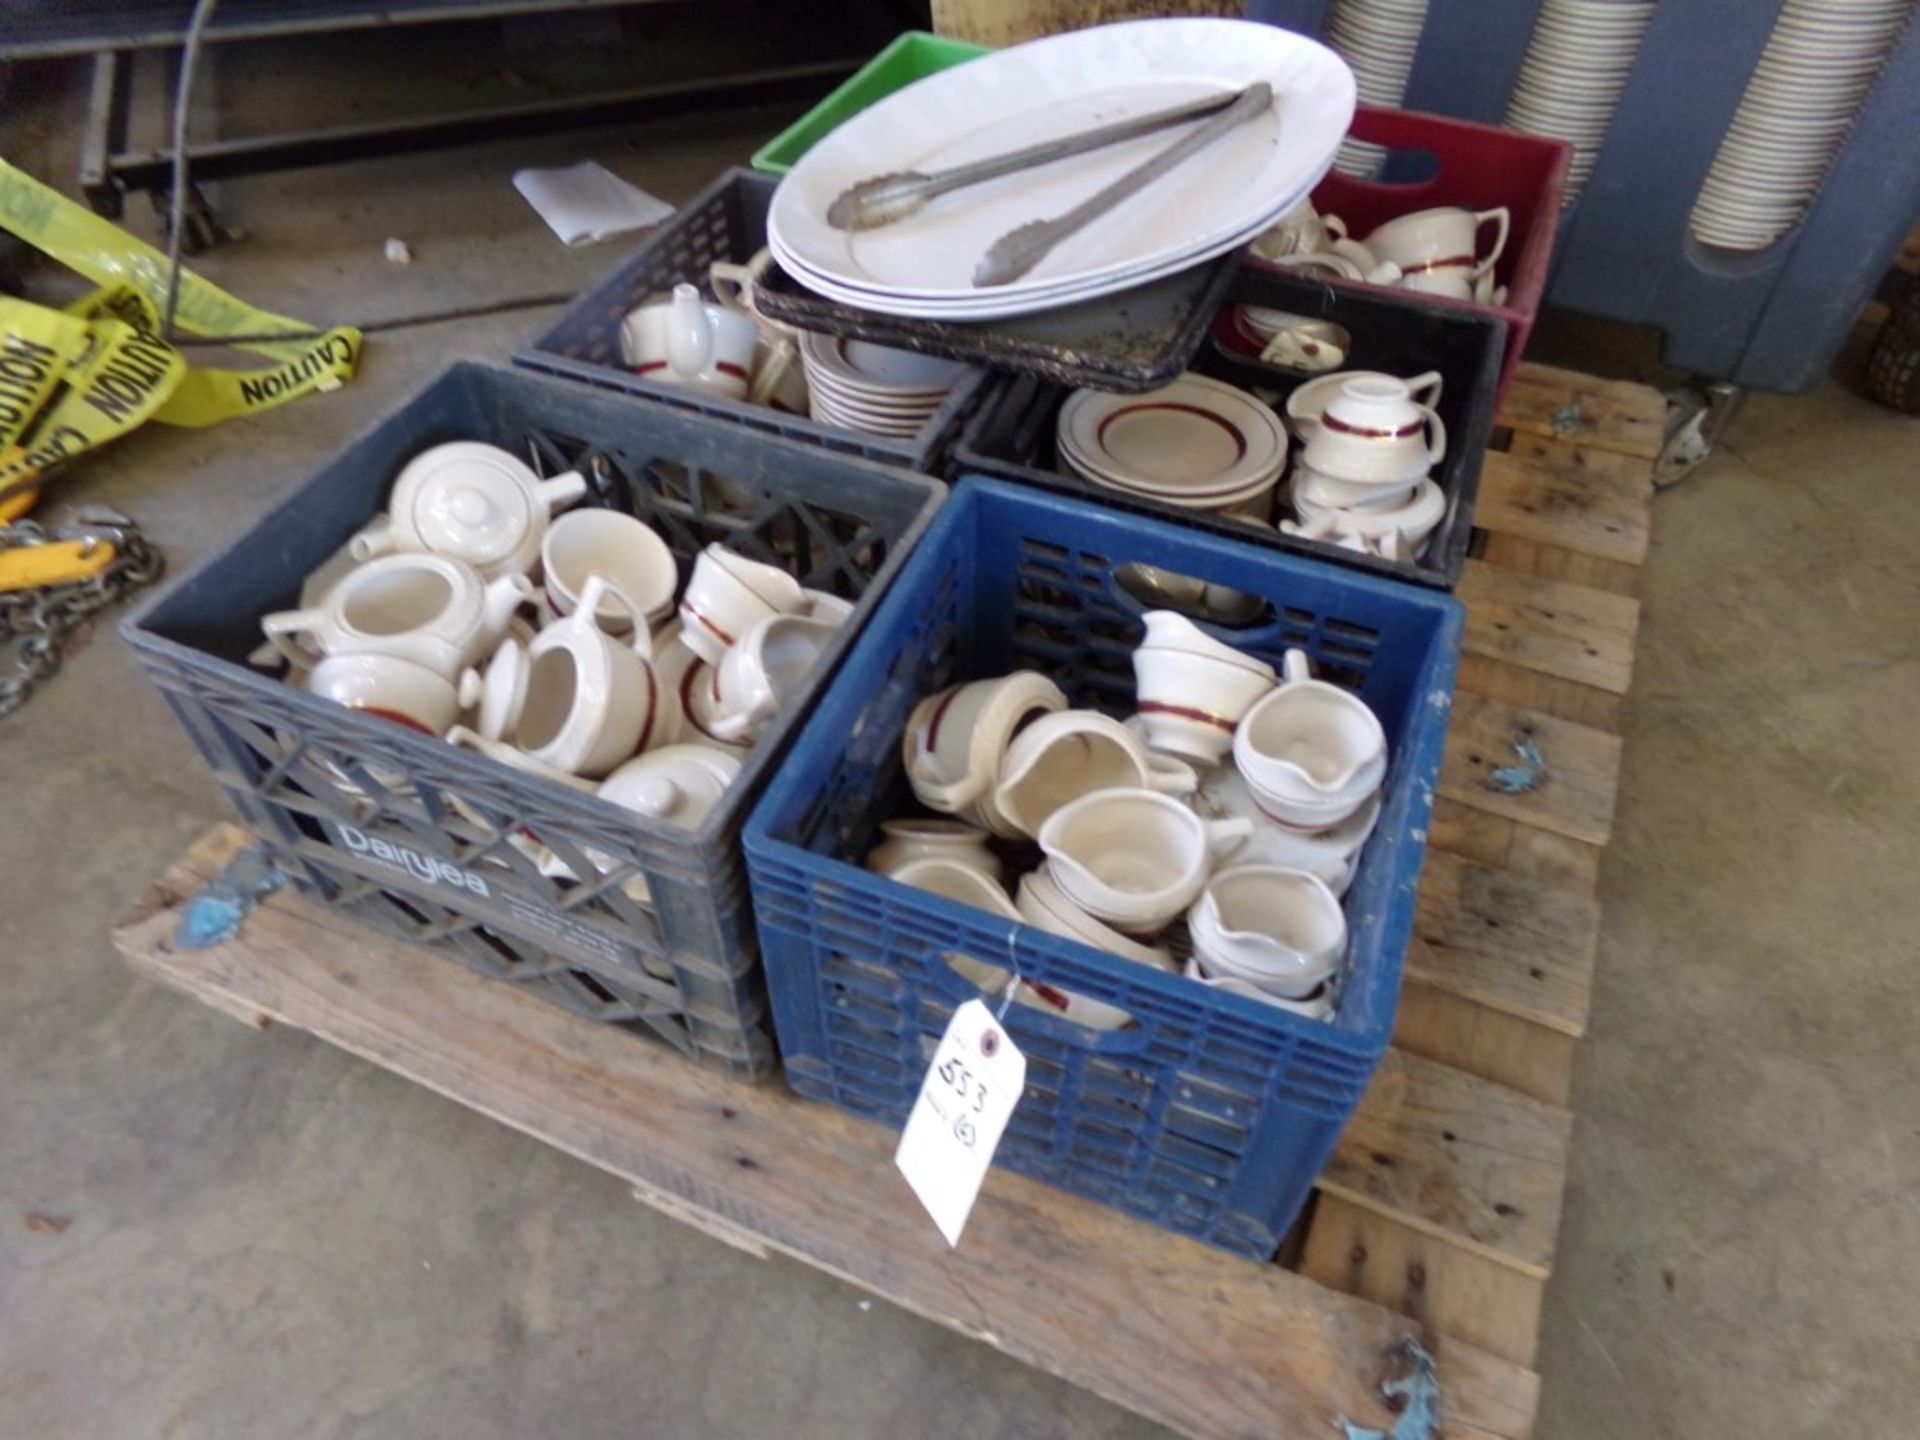 (6) Plastic Crates of Saucers, Creamers, Tea Pots, Cups, Etc. (Mostly Chenango China Brand)